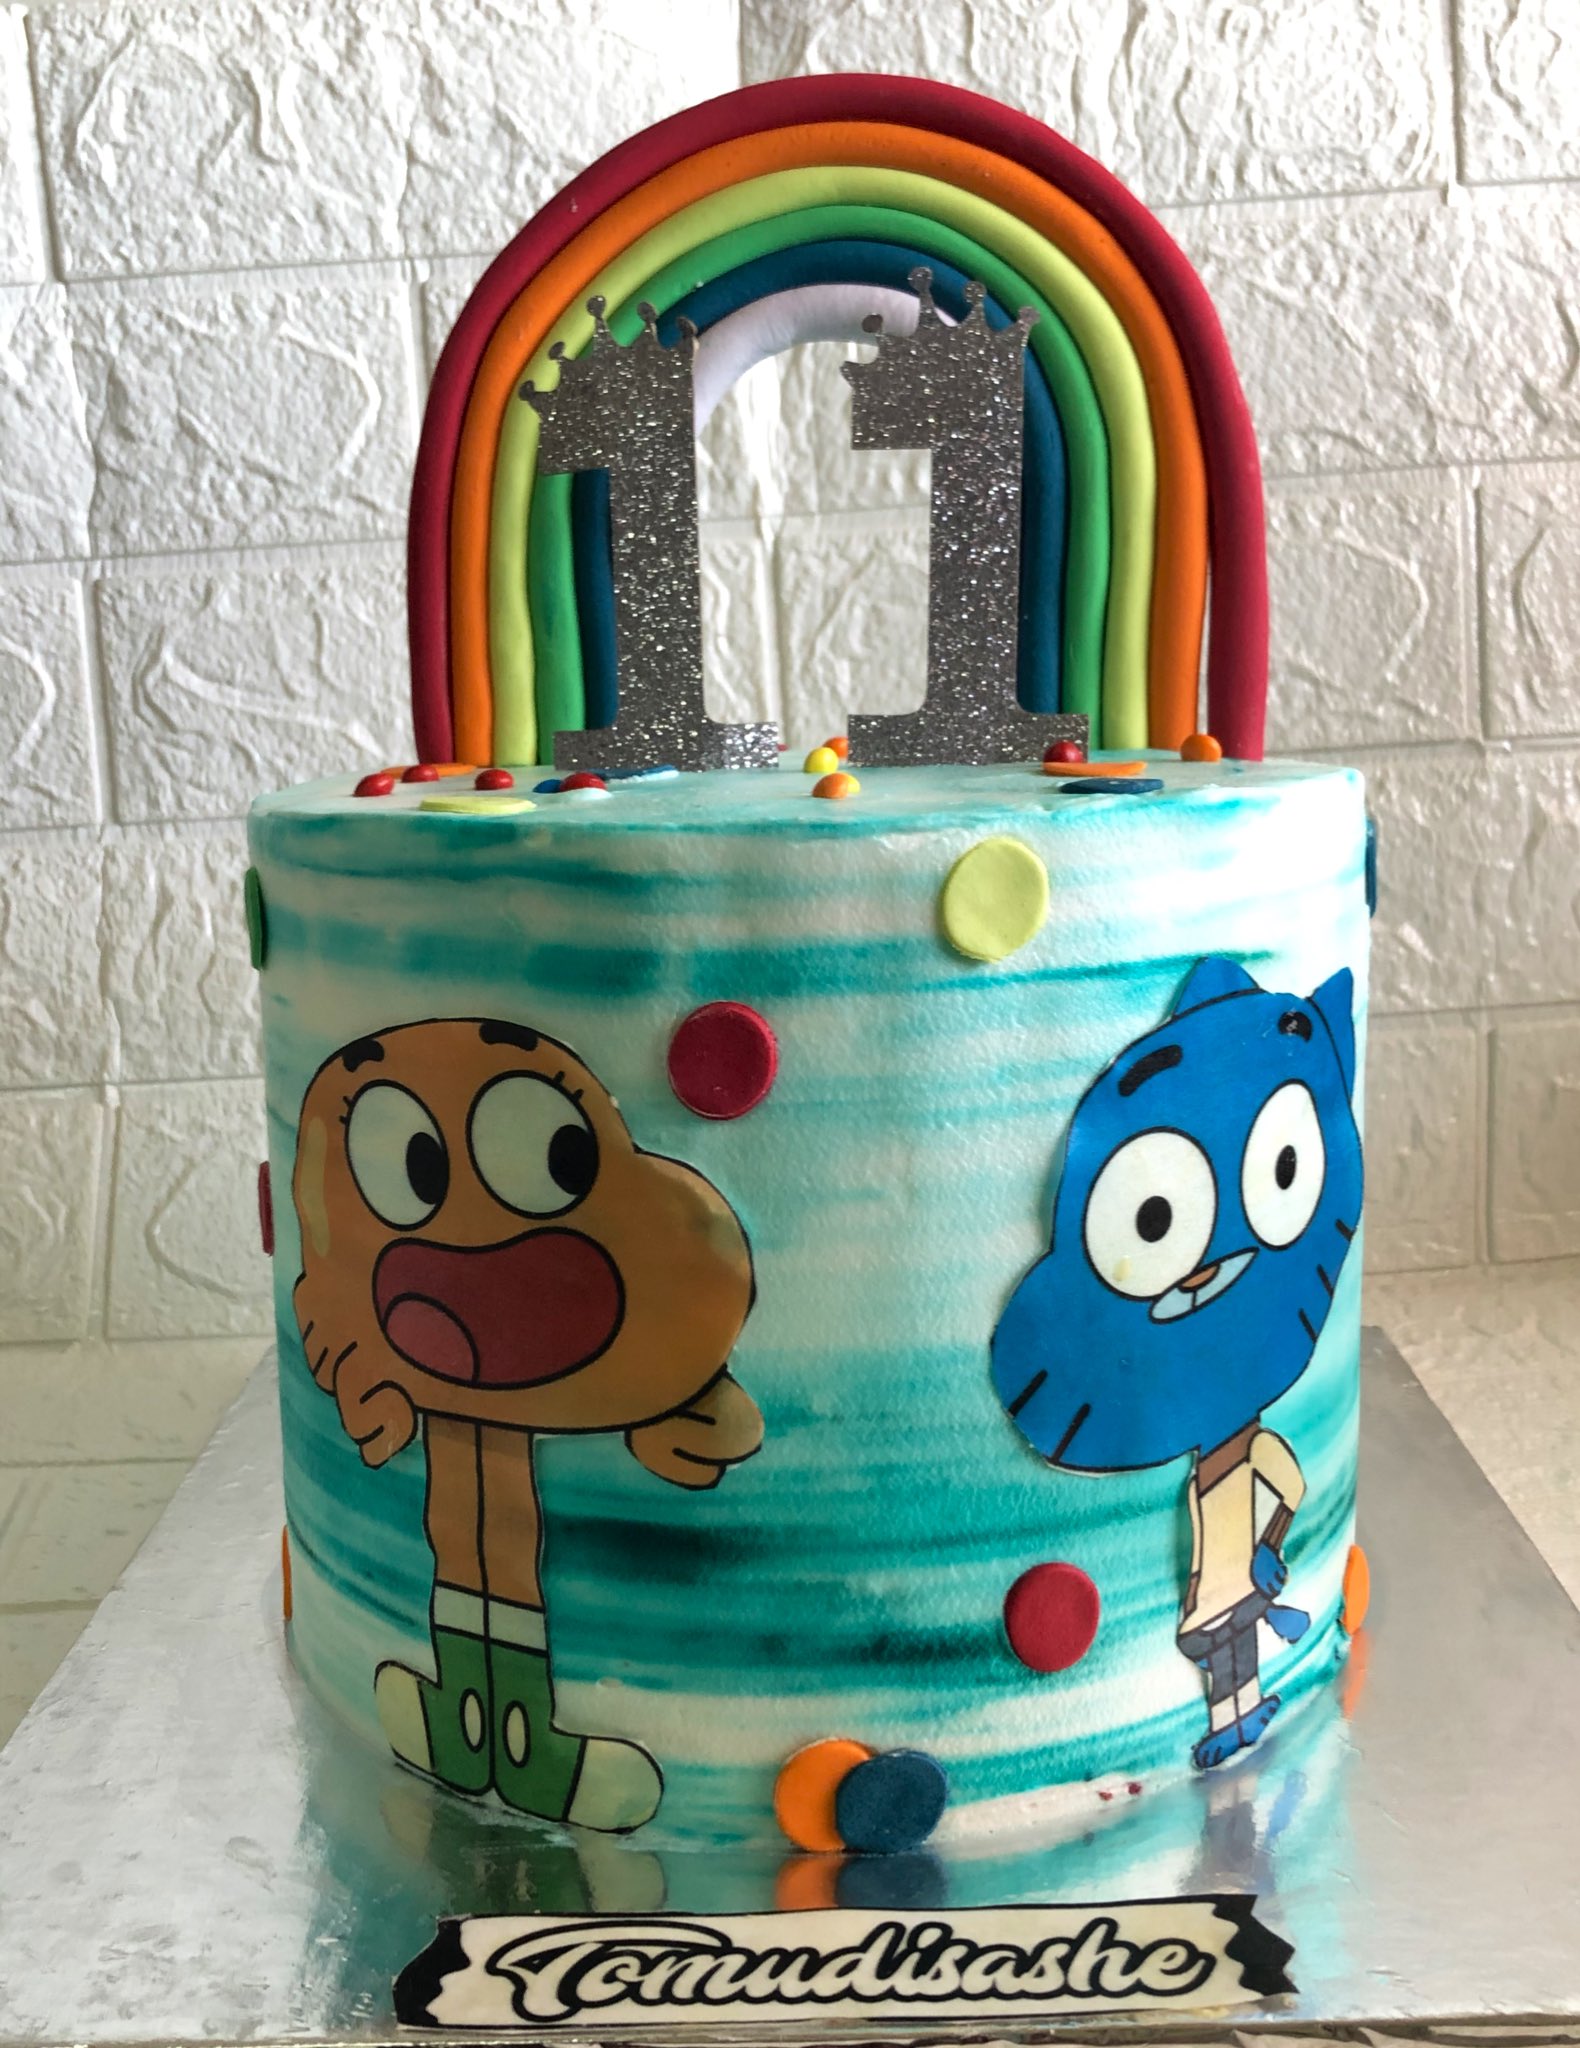 The Sweet Life Cakery on X: "We should enjoy every moment of our life, 'cause it can be very long or very short. - The Amazing World of Gumball #TheAmazingWorldOfGumball #YourBulawayoBaker #TheSweetLifeCakery